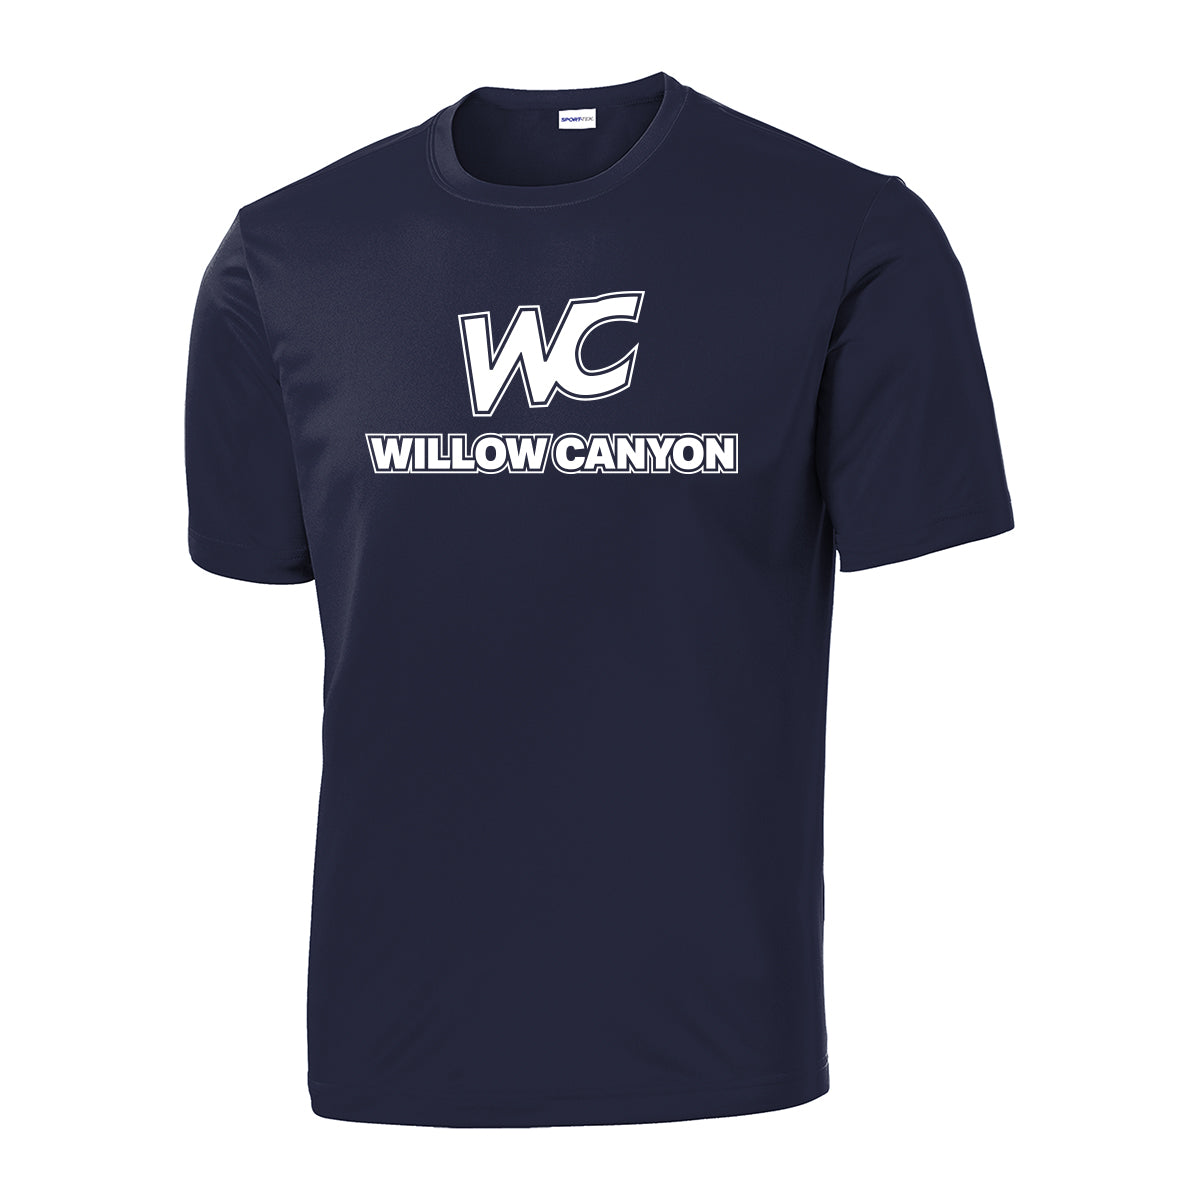 Willow Canyon Dri Fit Tee